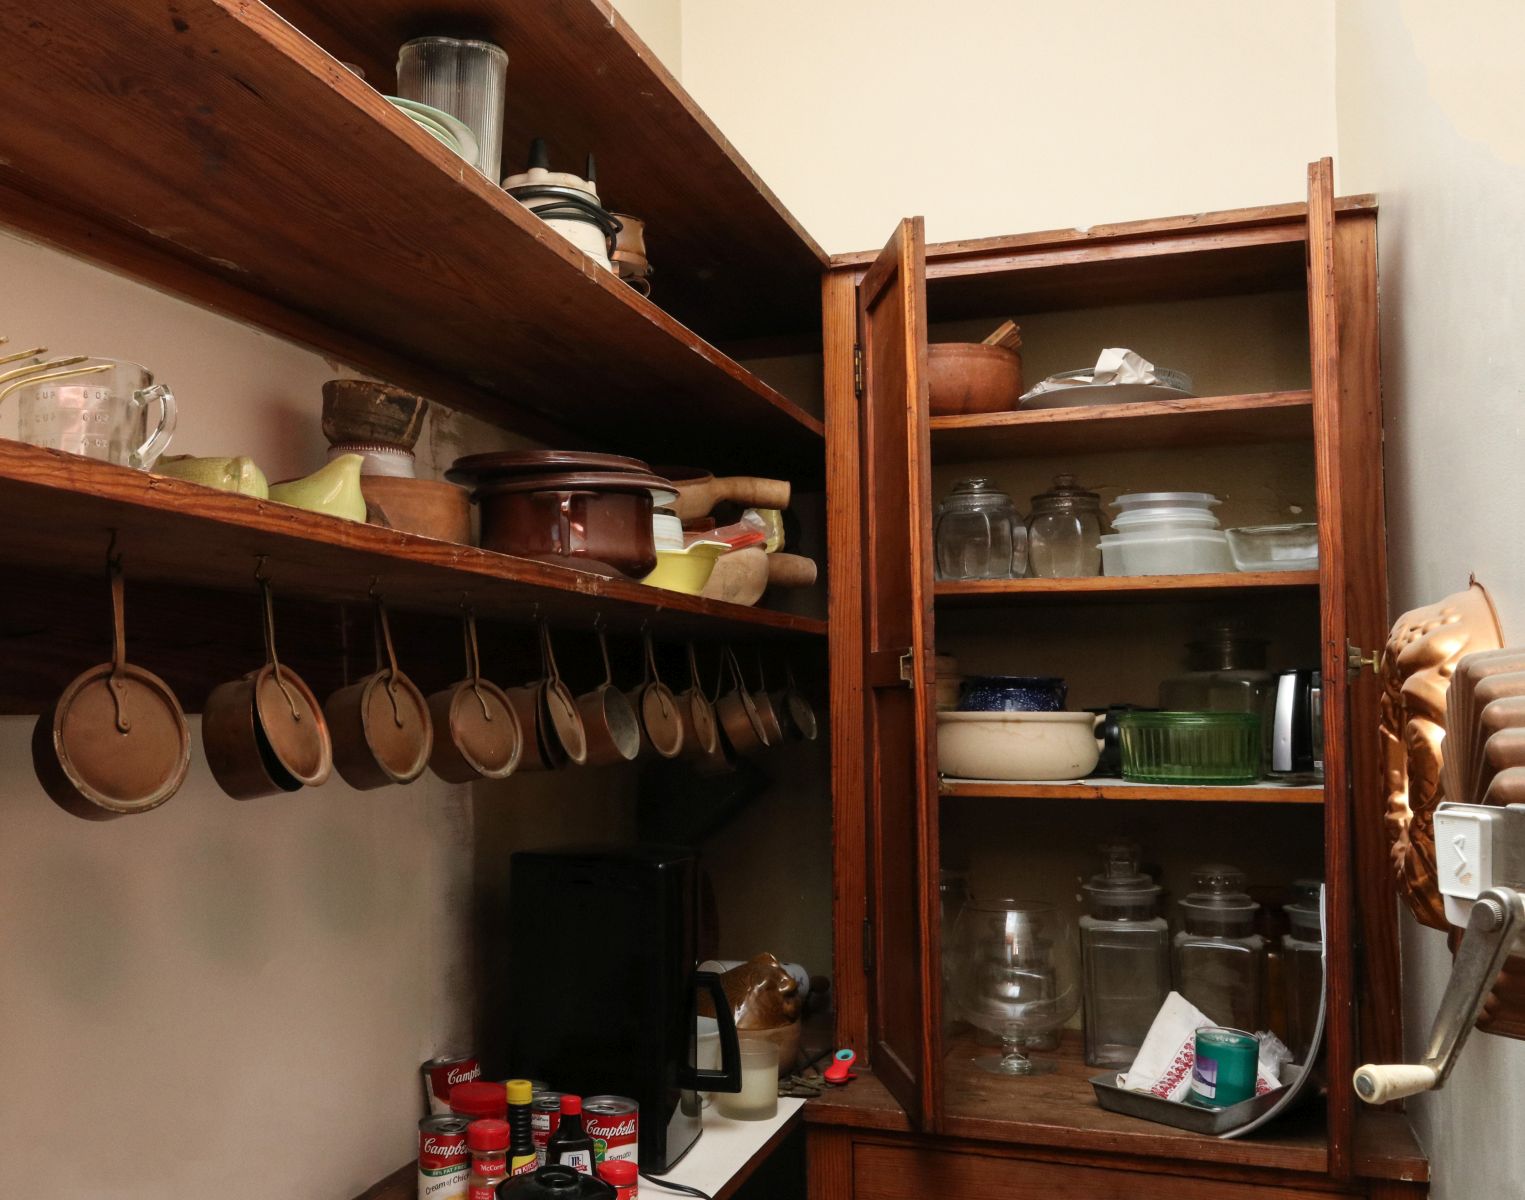 THE CONTENTS OF A KITCHEN PANTRY AS SHOWN - AS-IS